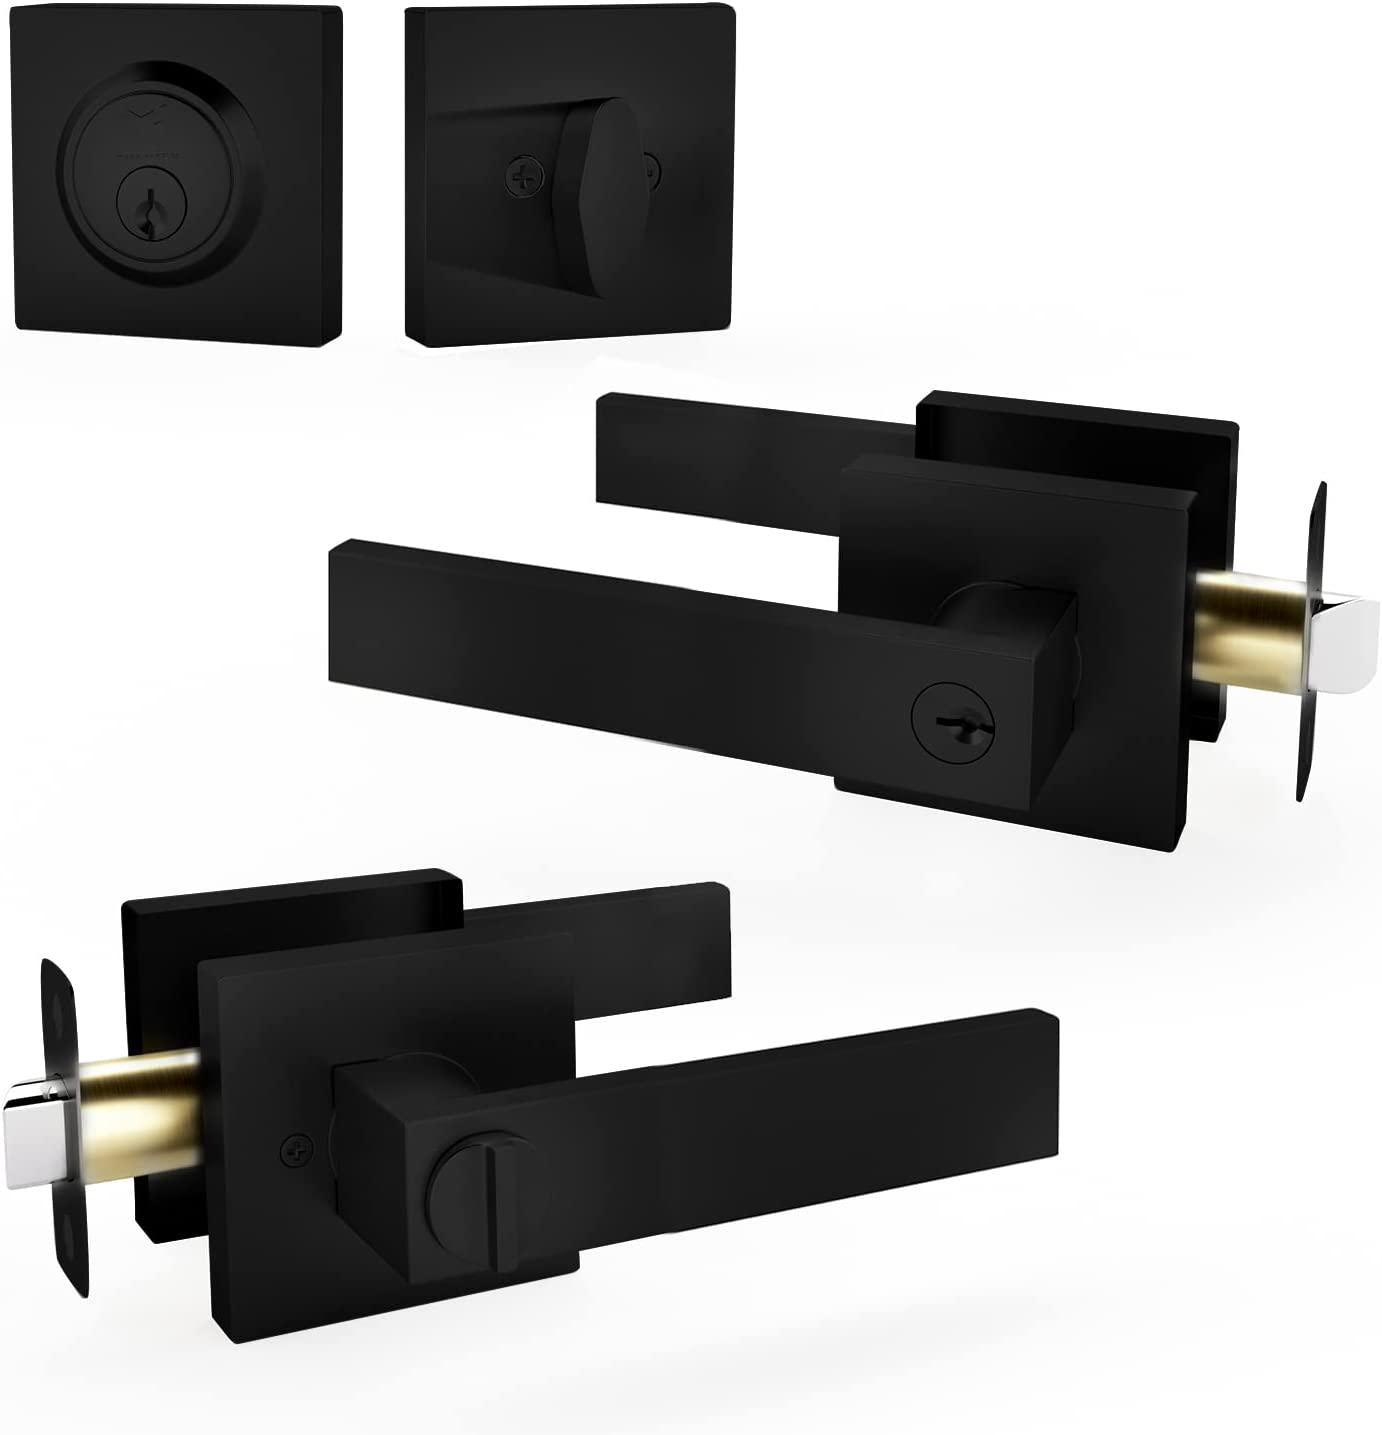 MEGA HANDLES, Entry Lever Door Handle and Single Cylinder Deadbolt Lock and Key Combo Pack - Heavy Duty Square Locking Lever Set for Left or Right-Handed Doors - Interior/Exterior Door Levers in Matte Black Finish